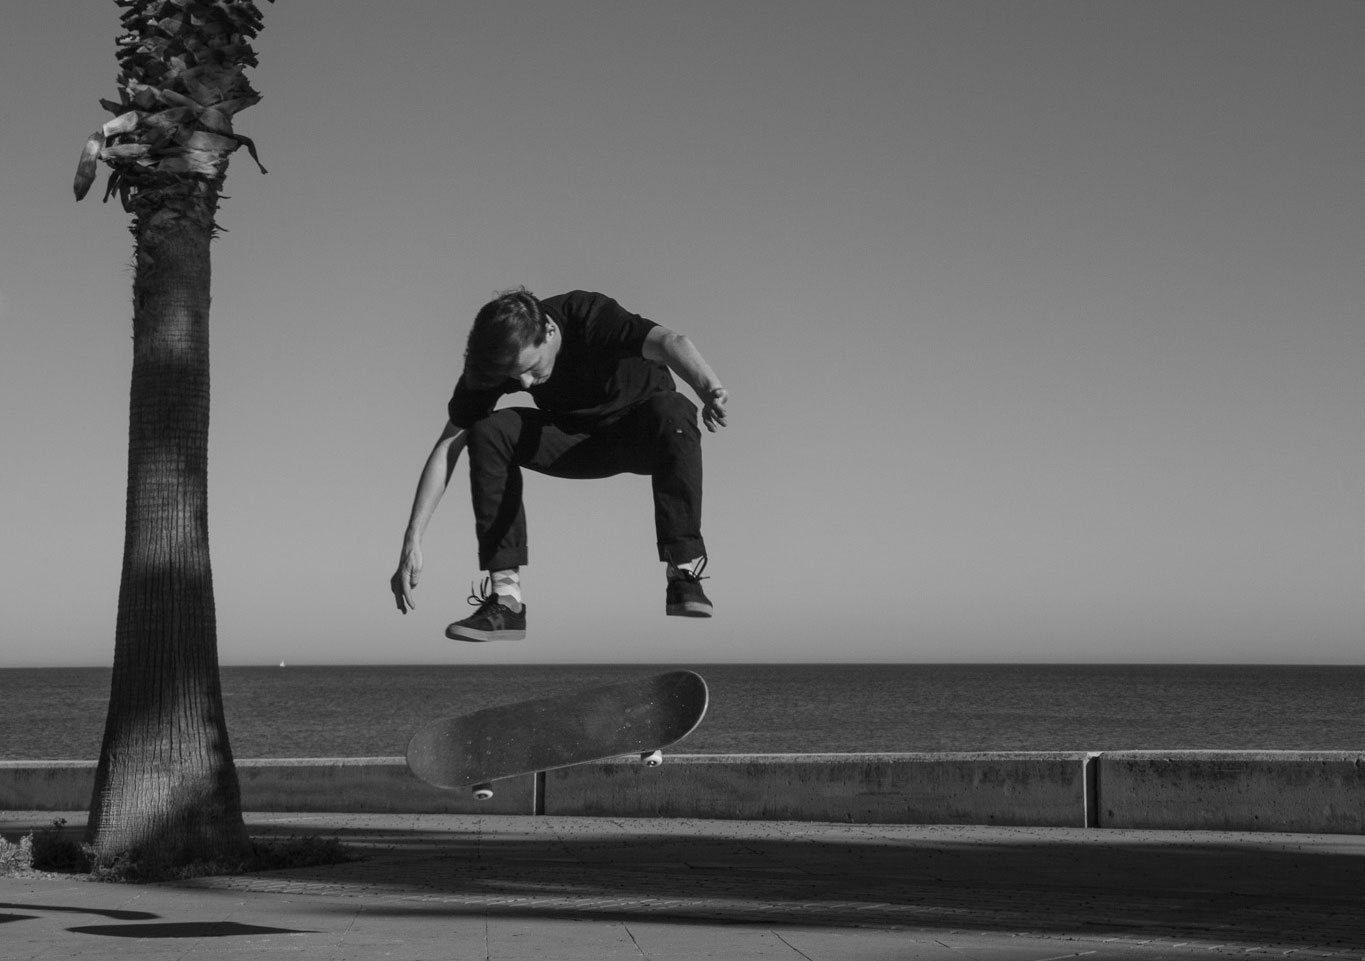 As skateboarding lands in the Olympics, Poland's young hopefuls are put to the test